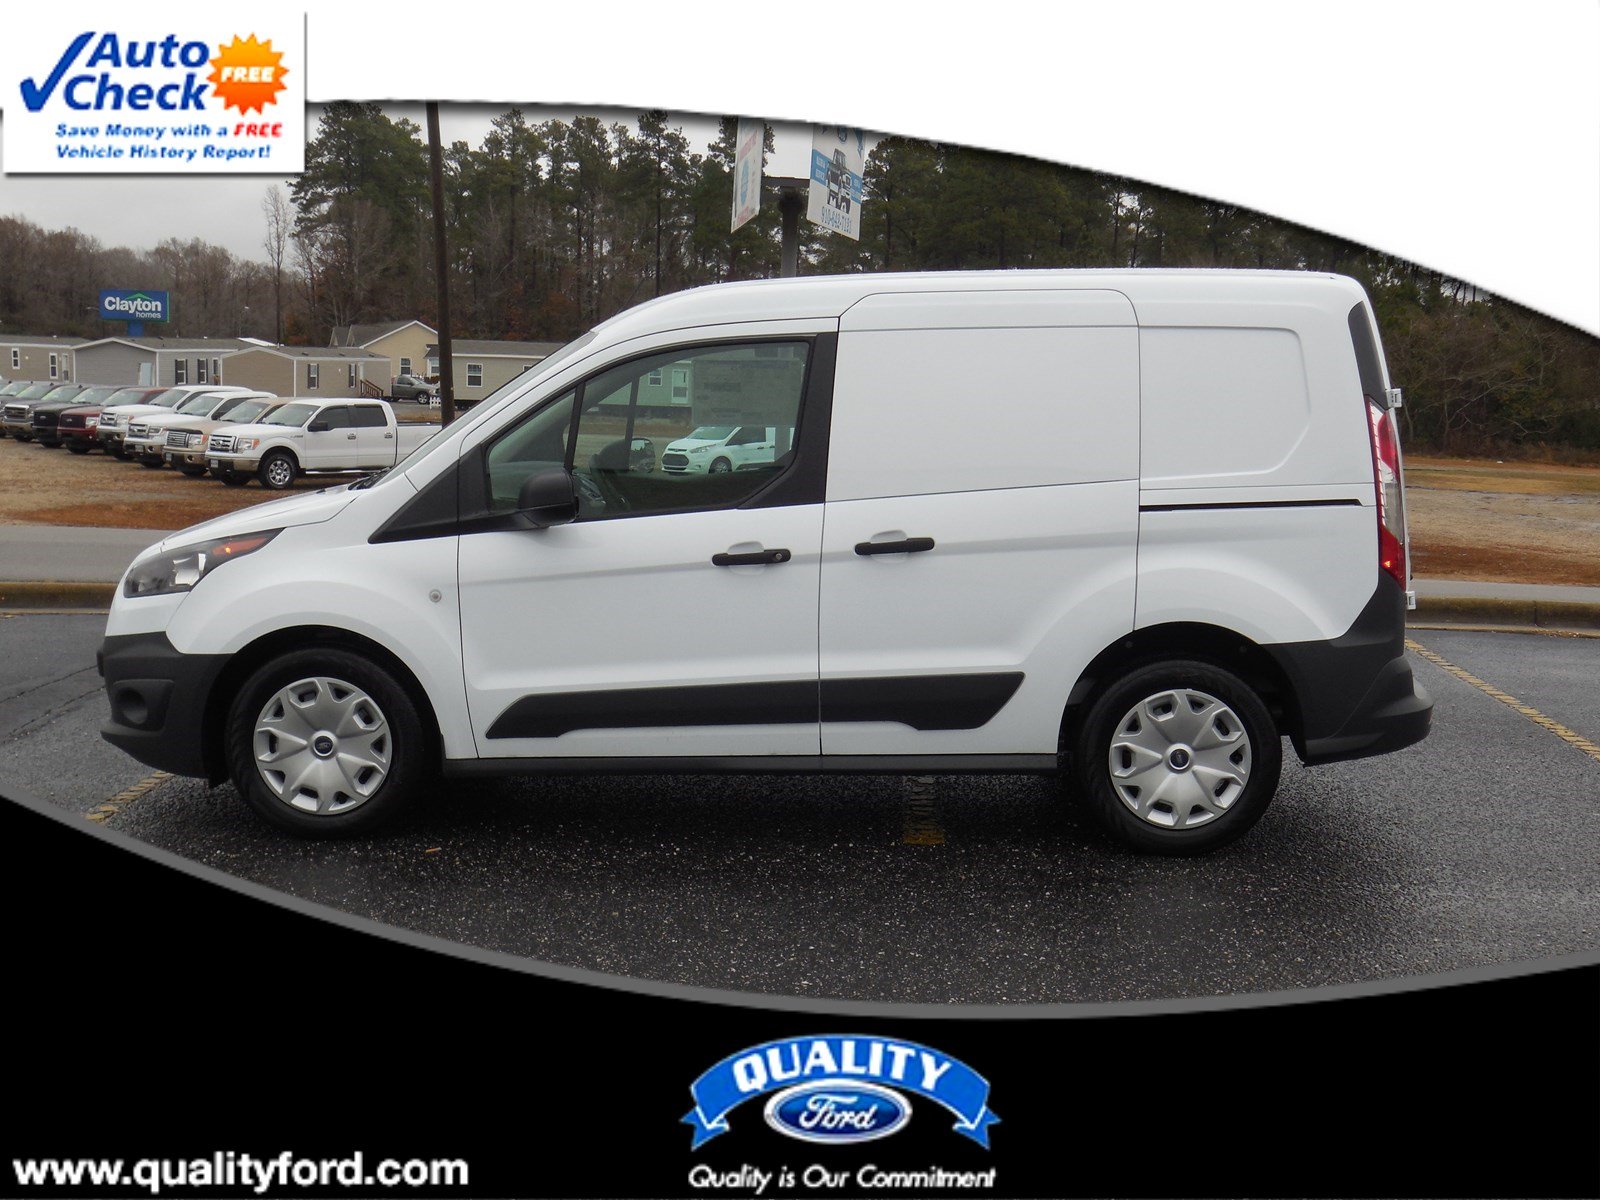 2018 ford transit connect for sale